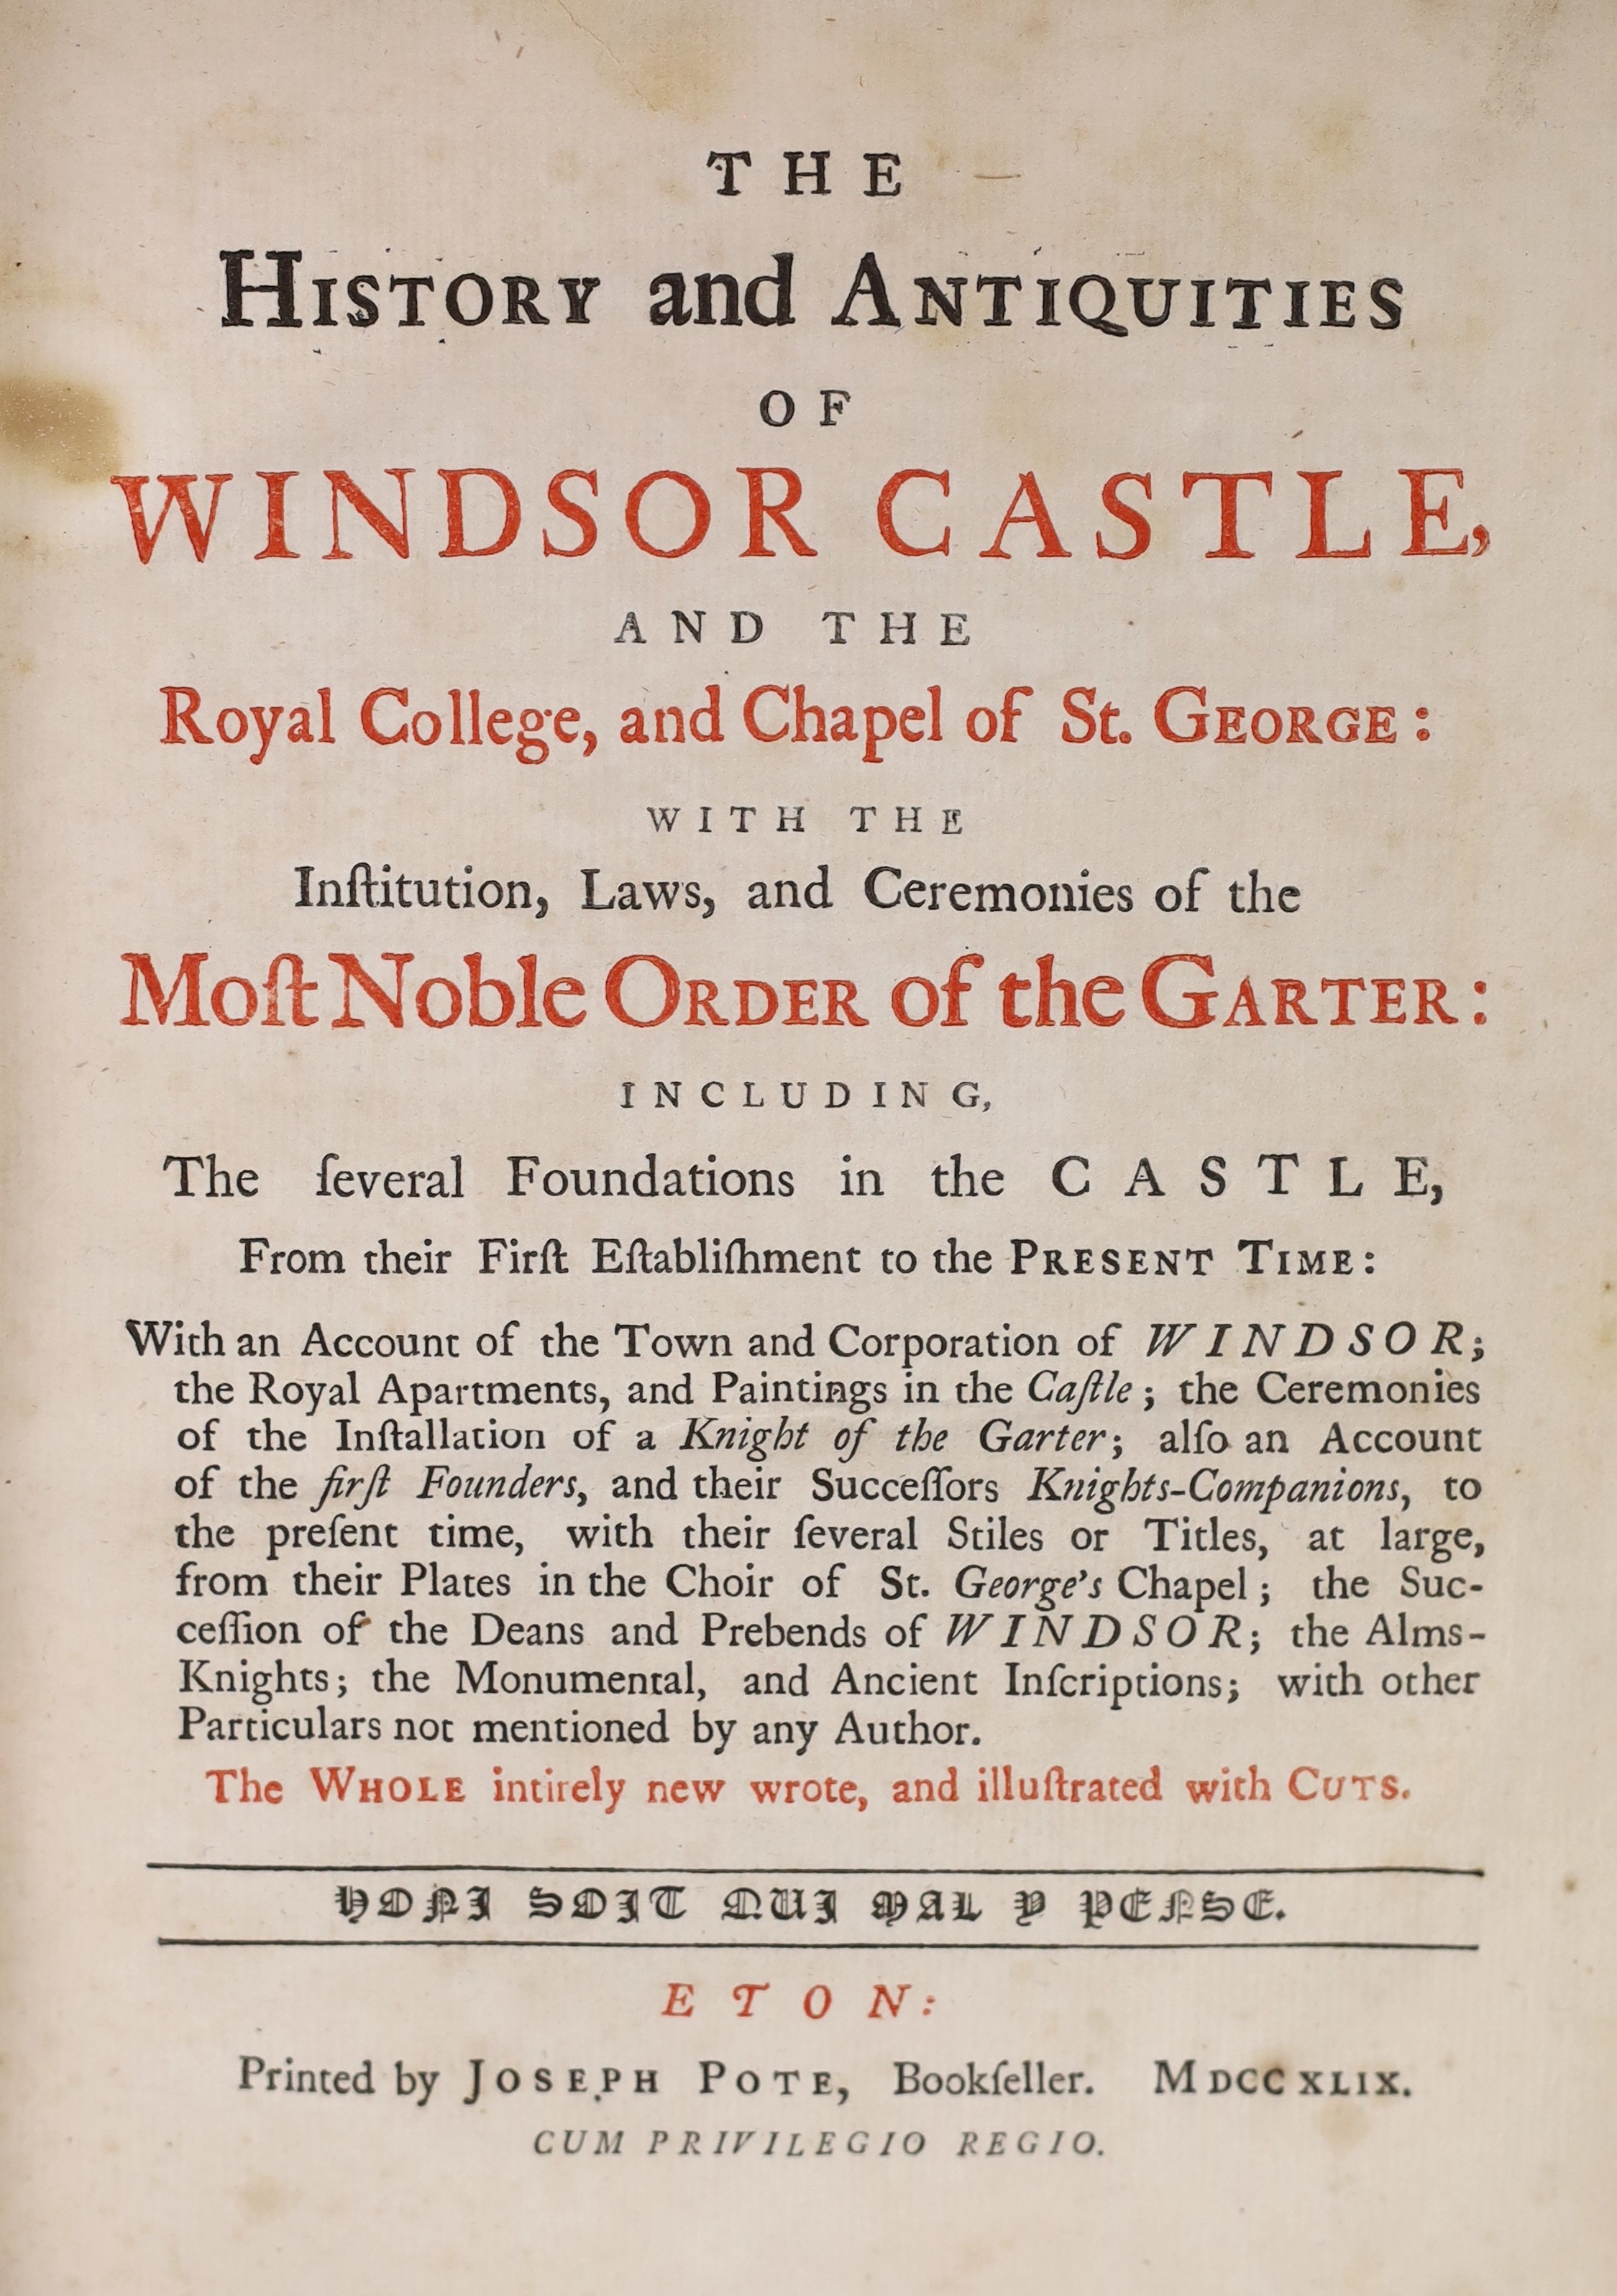 WINDSOR: (Pote, Joseph) - The History and Antiquities of Windsor Castle, and the Royal College, and Chapel of St. George; with the Institution, Laws and Ceremonies of the Most Noble Order of the Garter ... with an Accoun